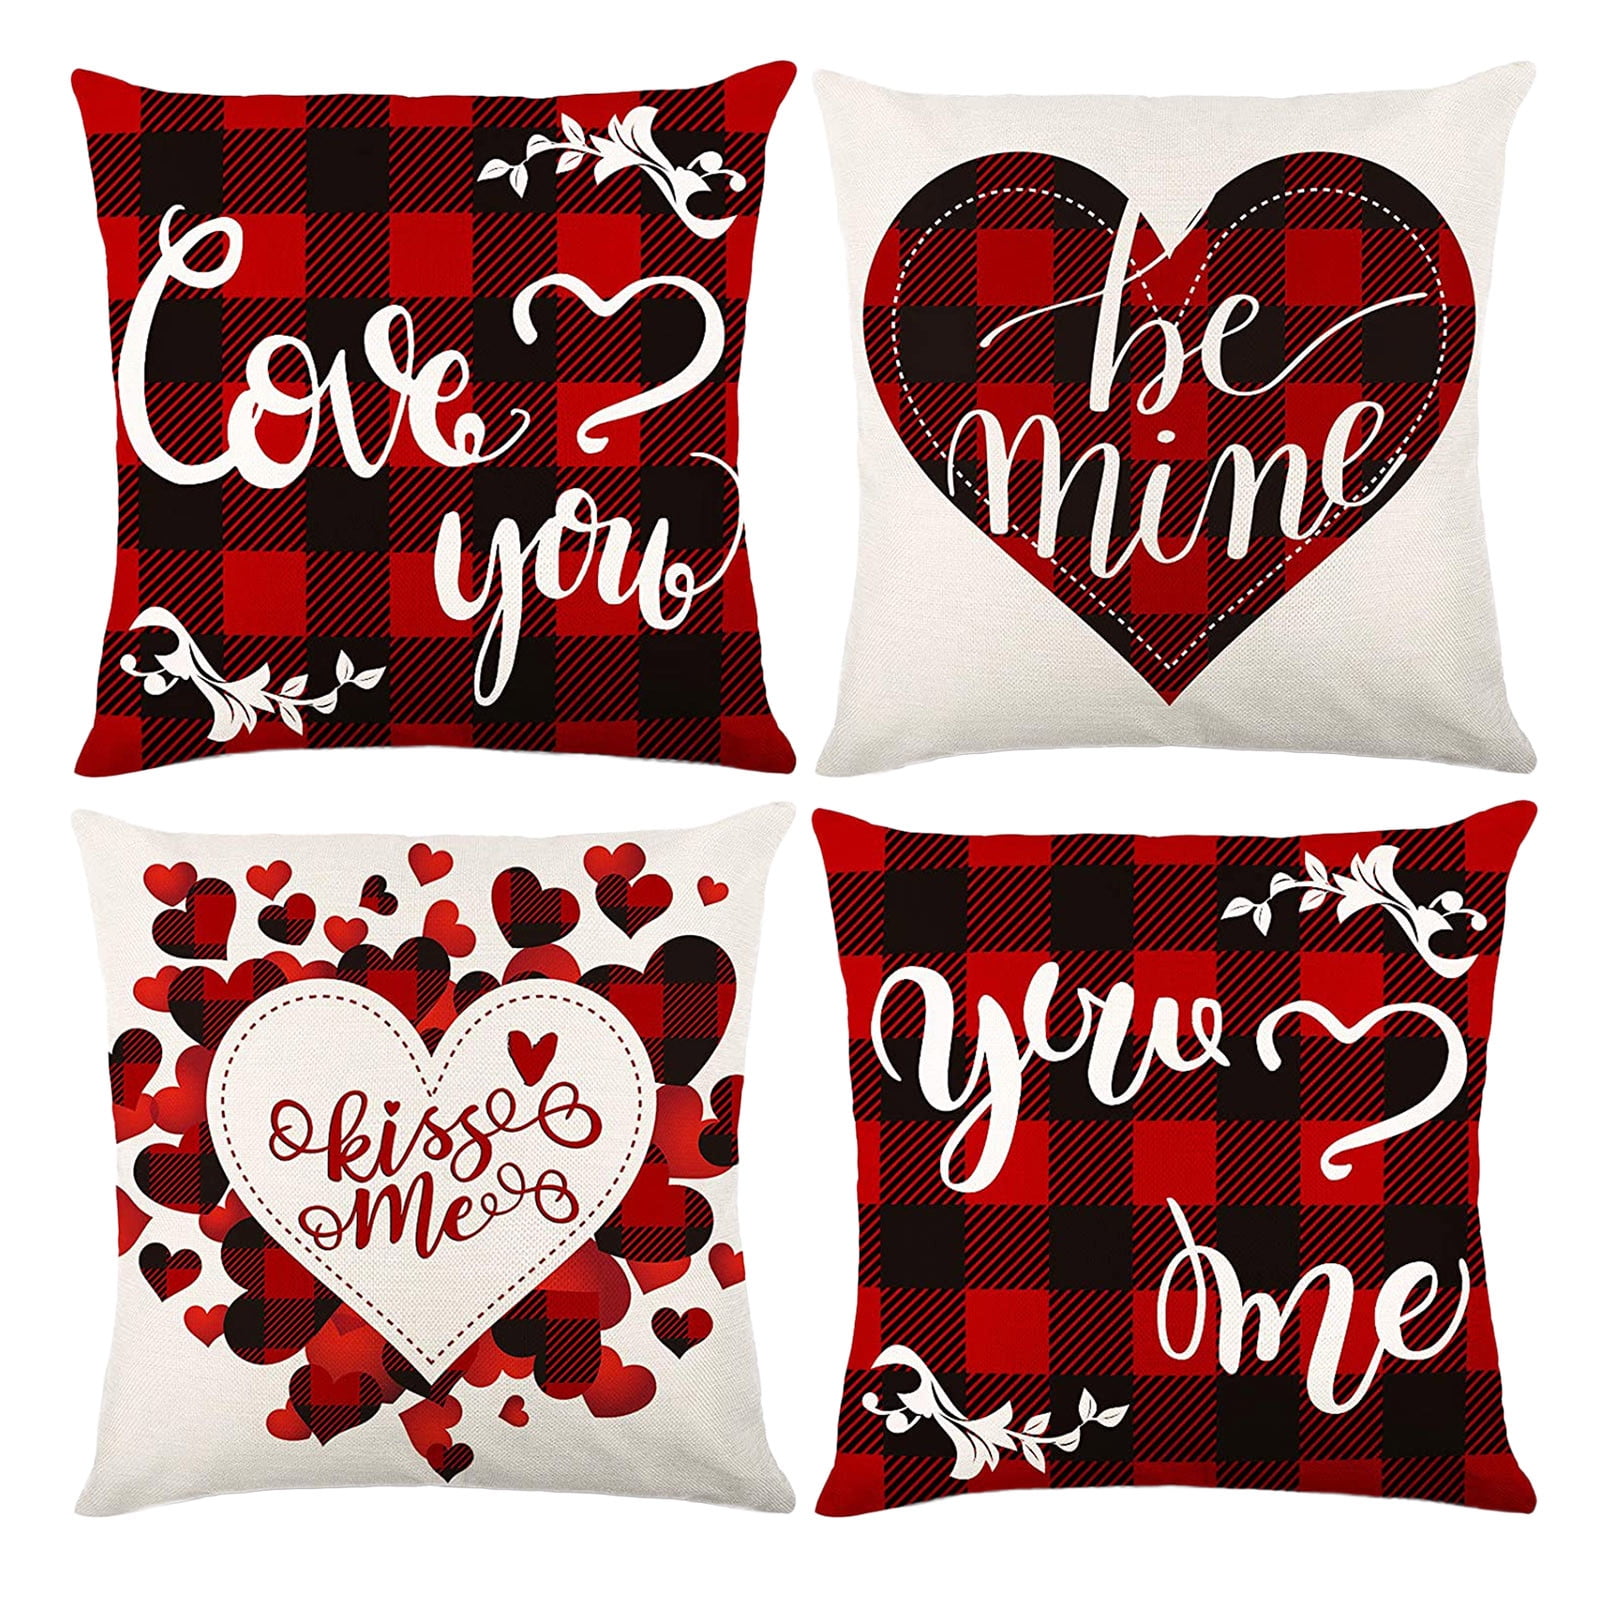 Red Love Heart Cushion Cover Pillow Case Sofa Home Valentine's Day Decor